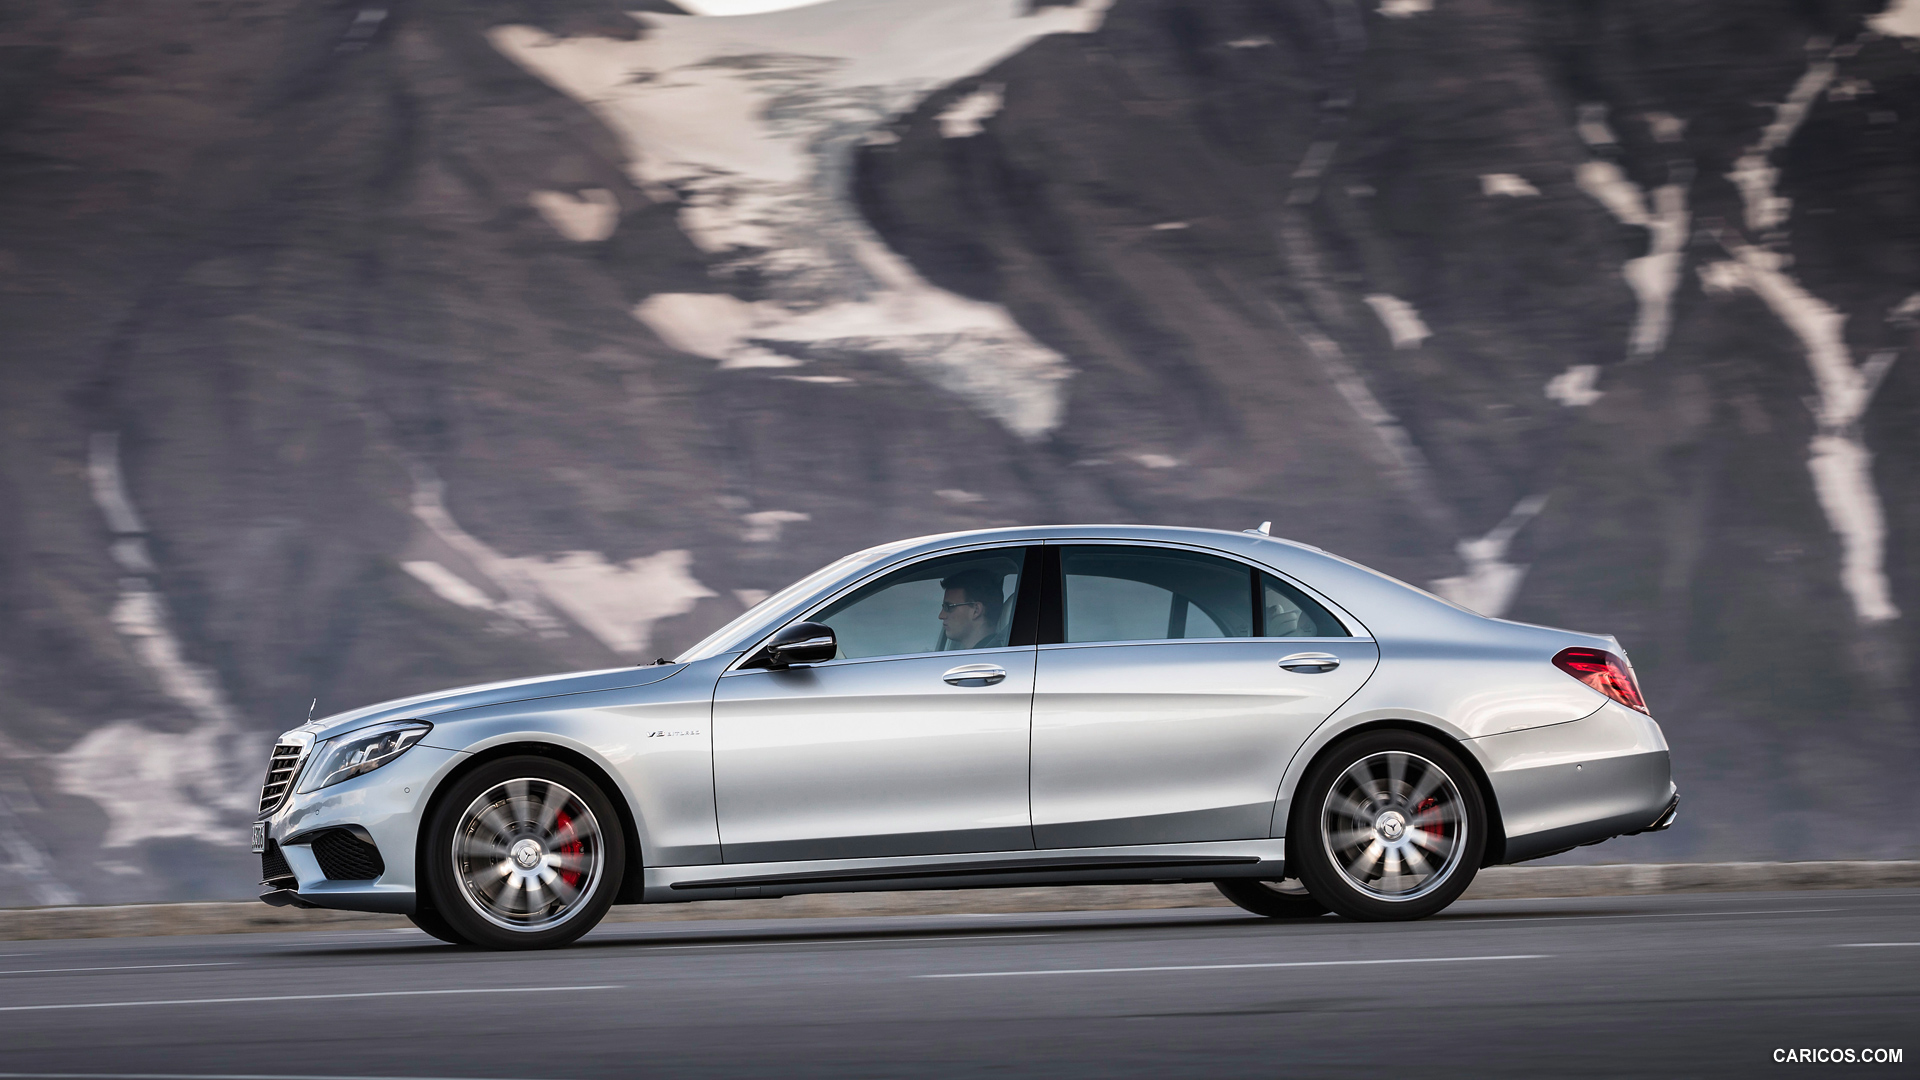 Mercedes-Benz S63 AMG W222 (2014)  - Side, #16 of 102